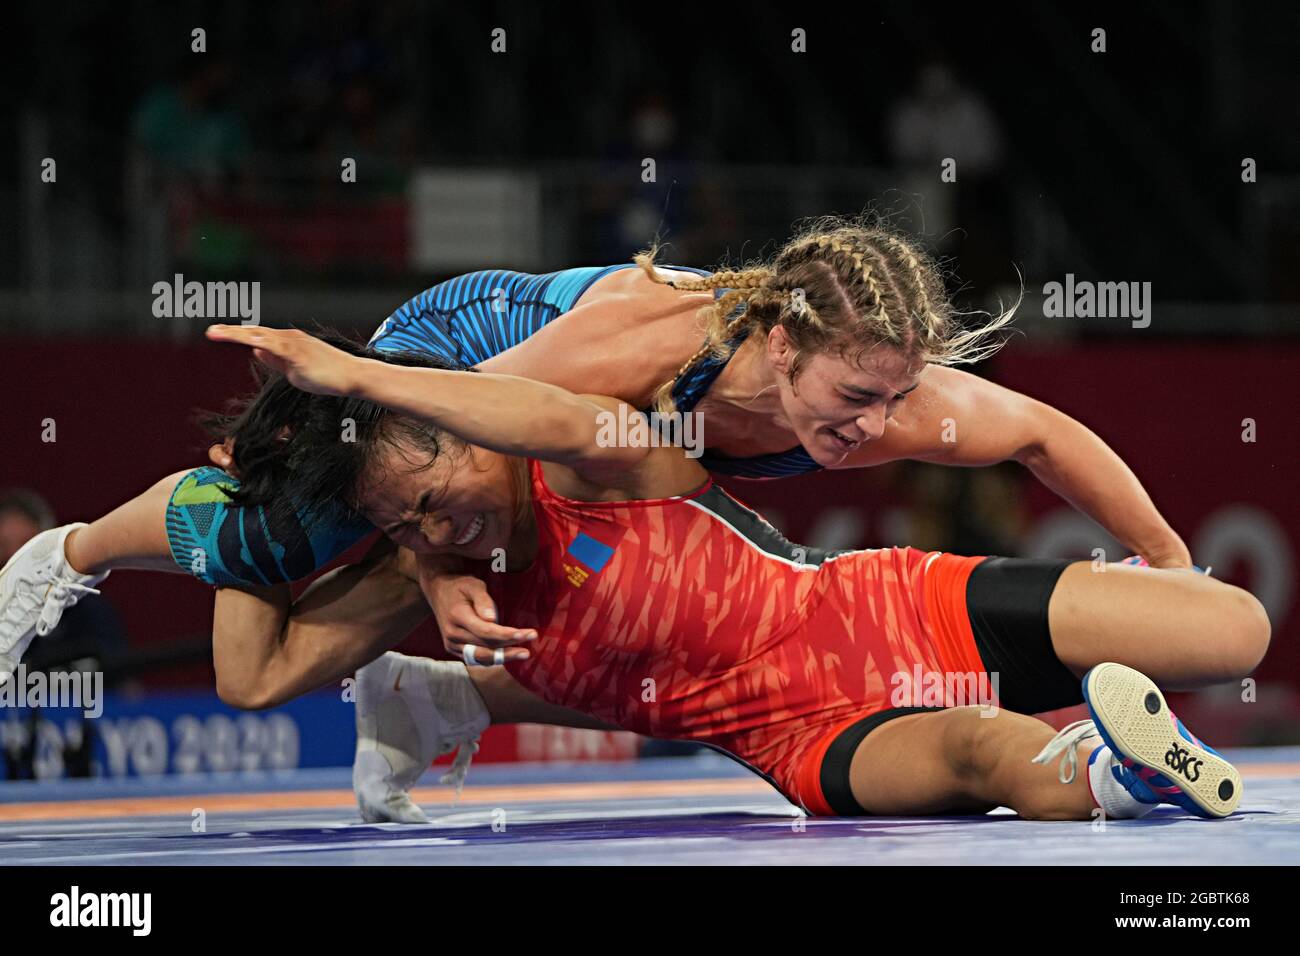 Chiba Japan 5th Aug 2021 Helen Louise Maroulis Up Of The United States Combats With